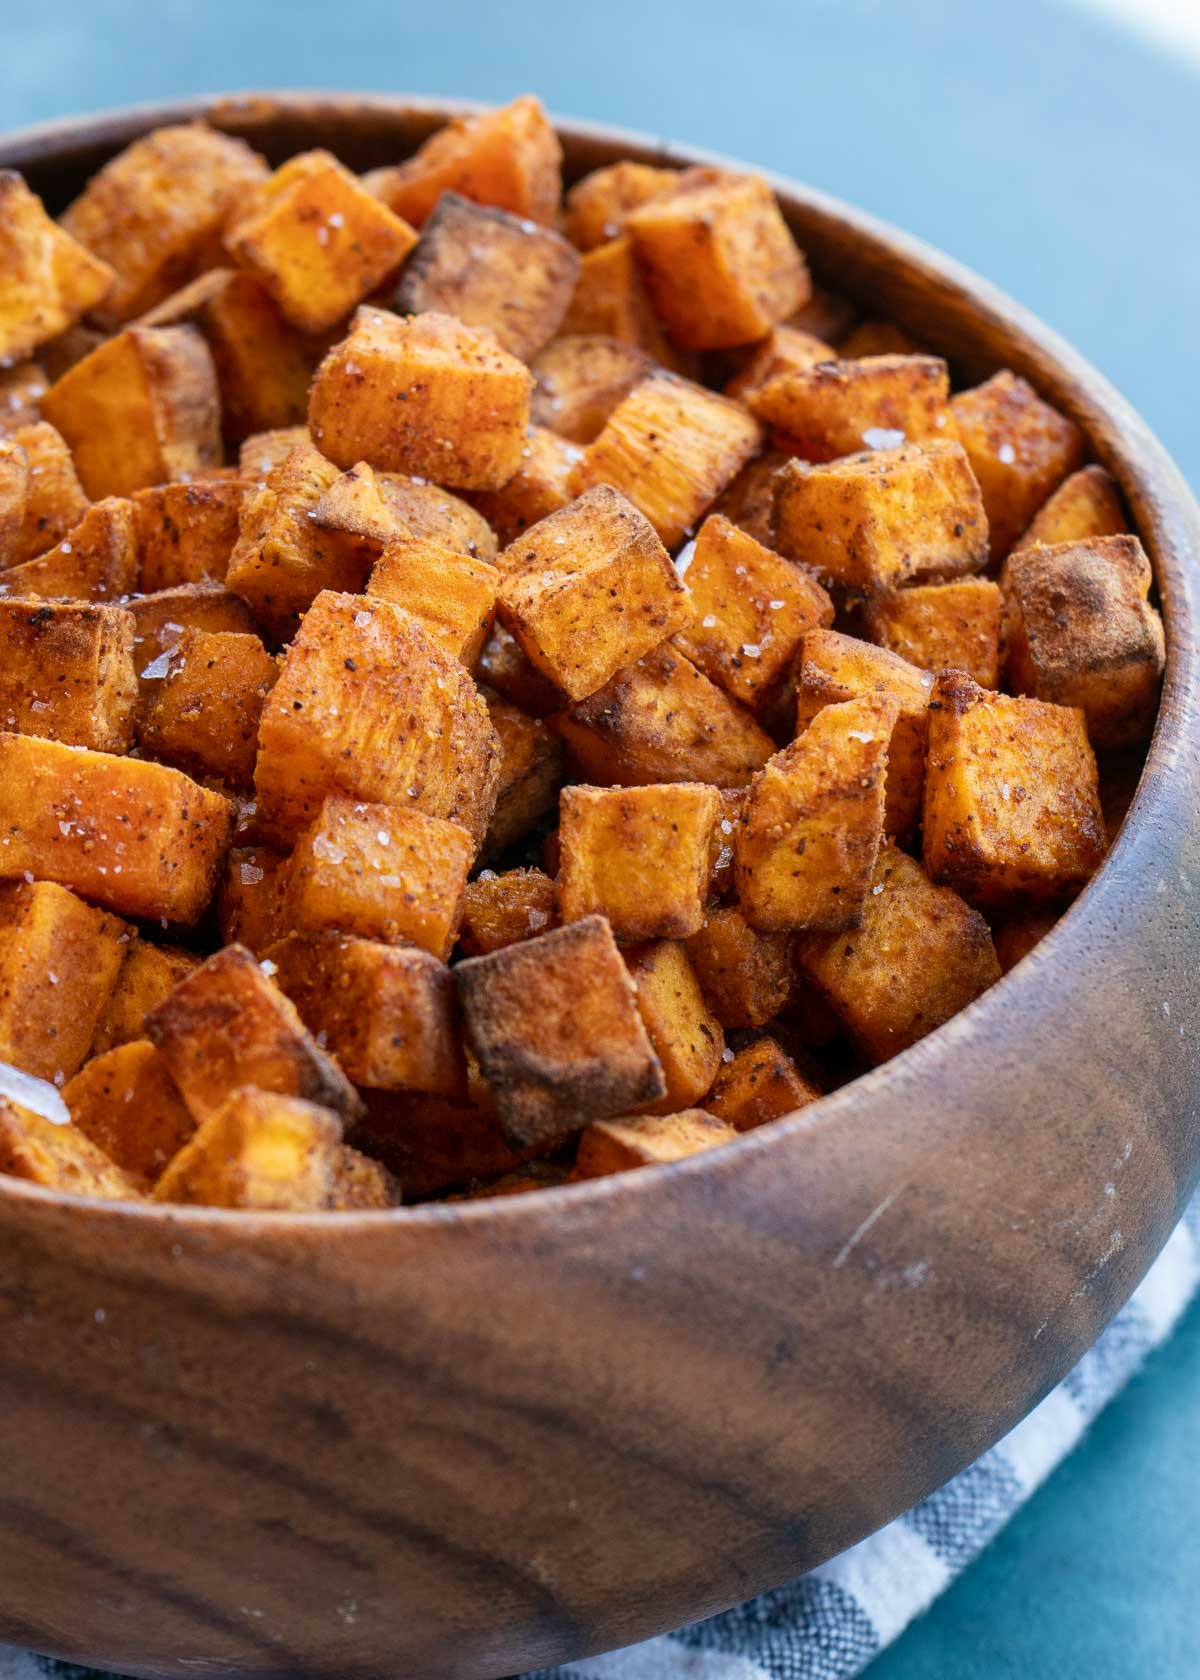 sweet potatoes in a bowl